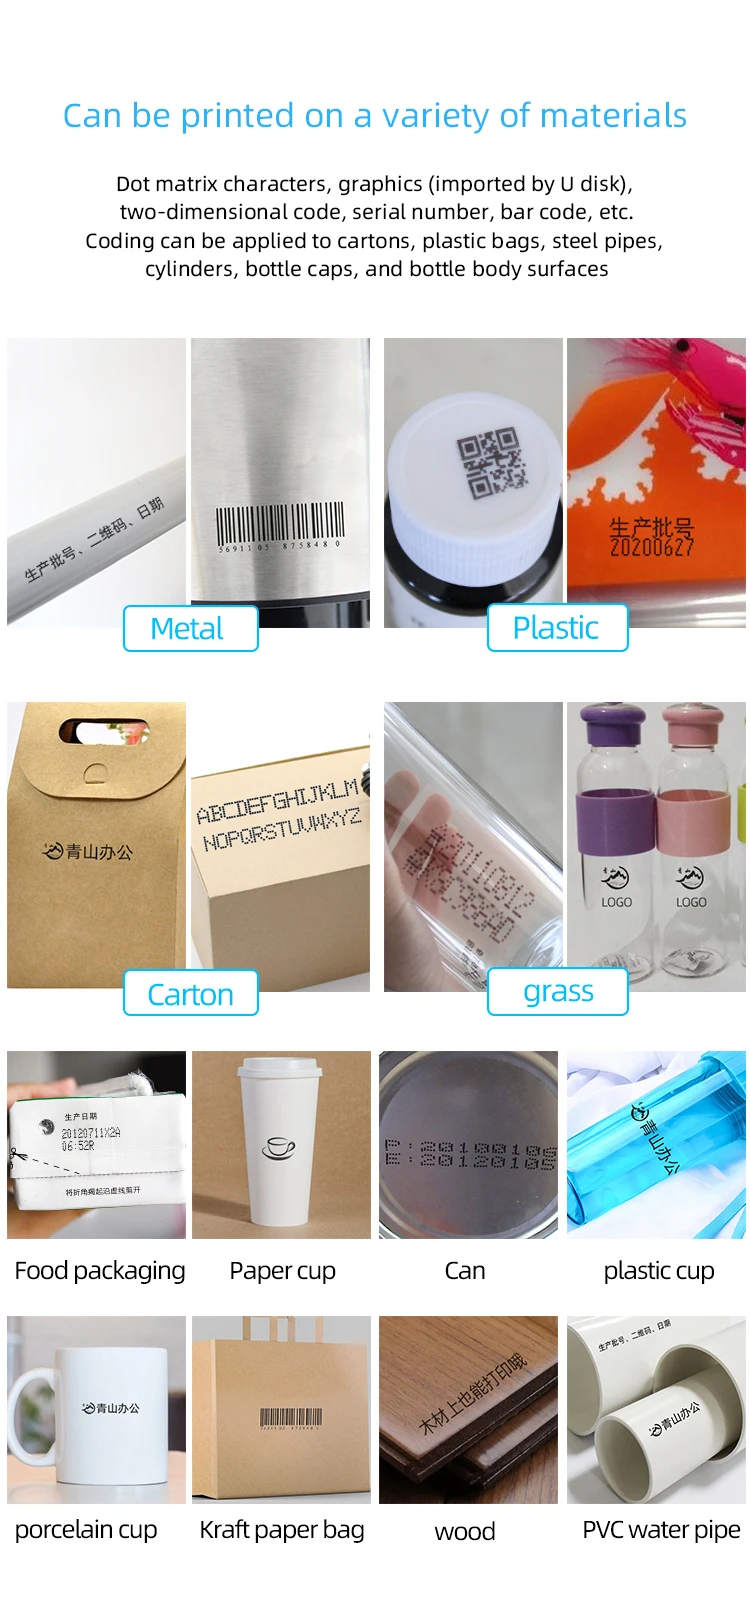 25.4mm One-inch Handheld Inkjet Printer Small Coder Packaging Production Date Shelf Life QR Code Barcode Logo Quick Dry Spray